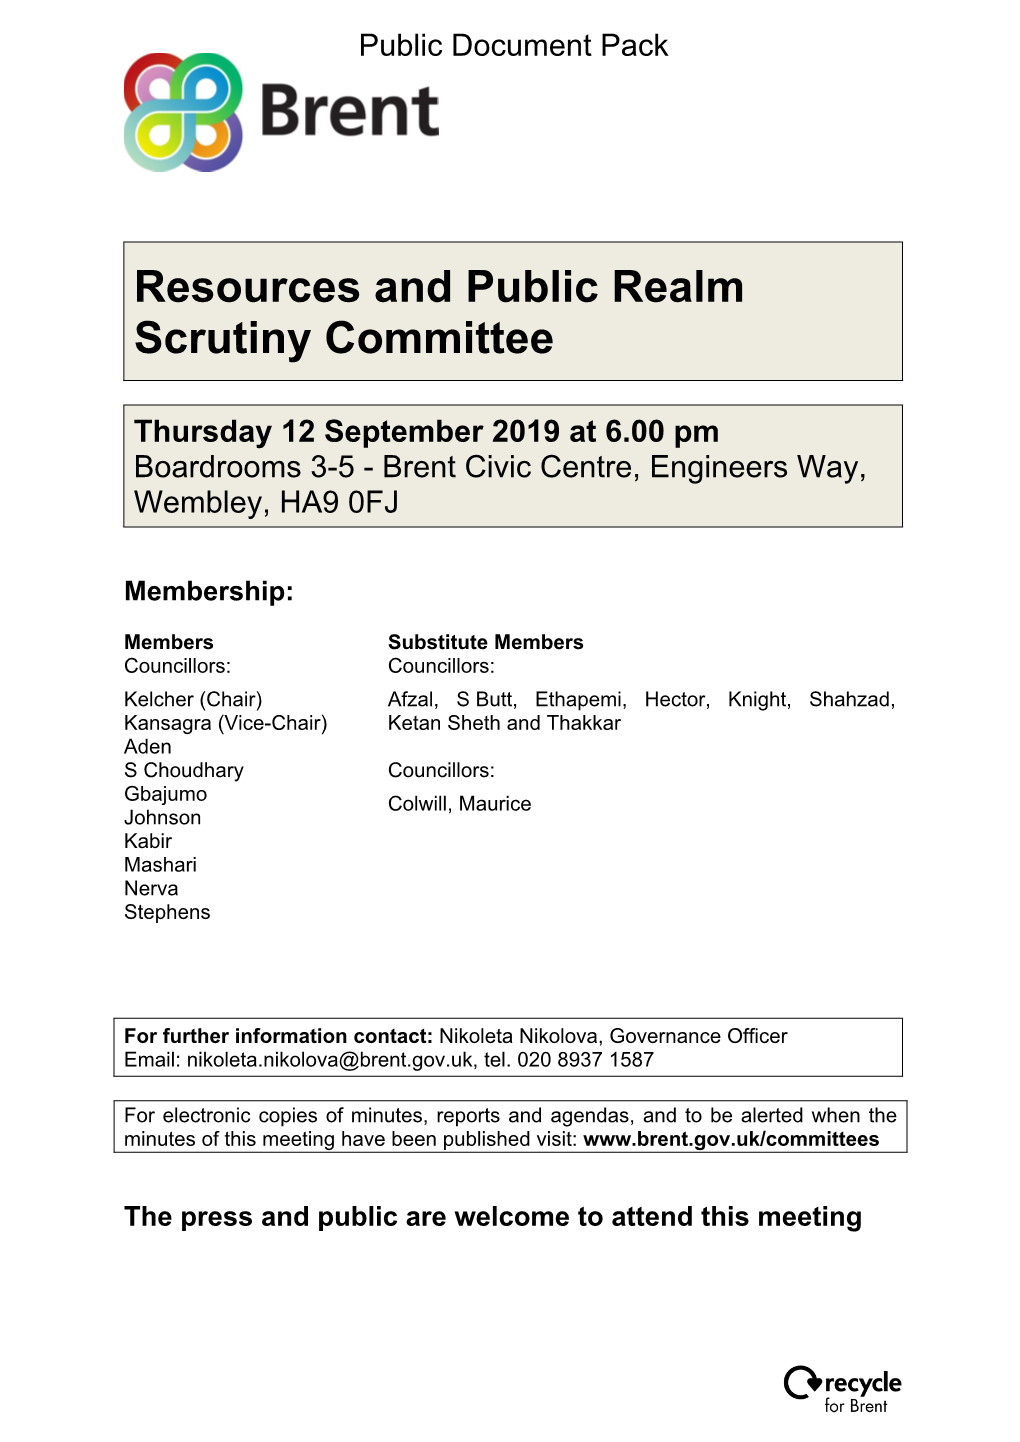 (Public Pack)Agenda Document for Resources and Public Realm